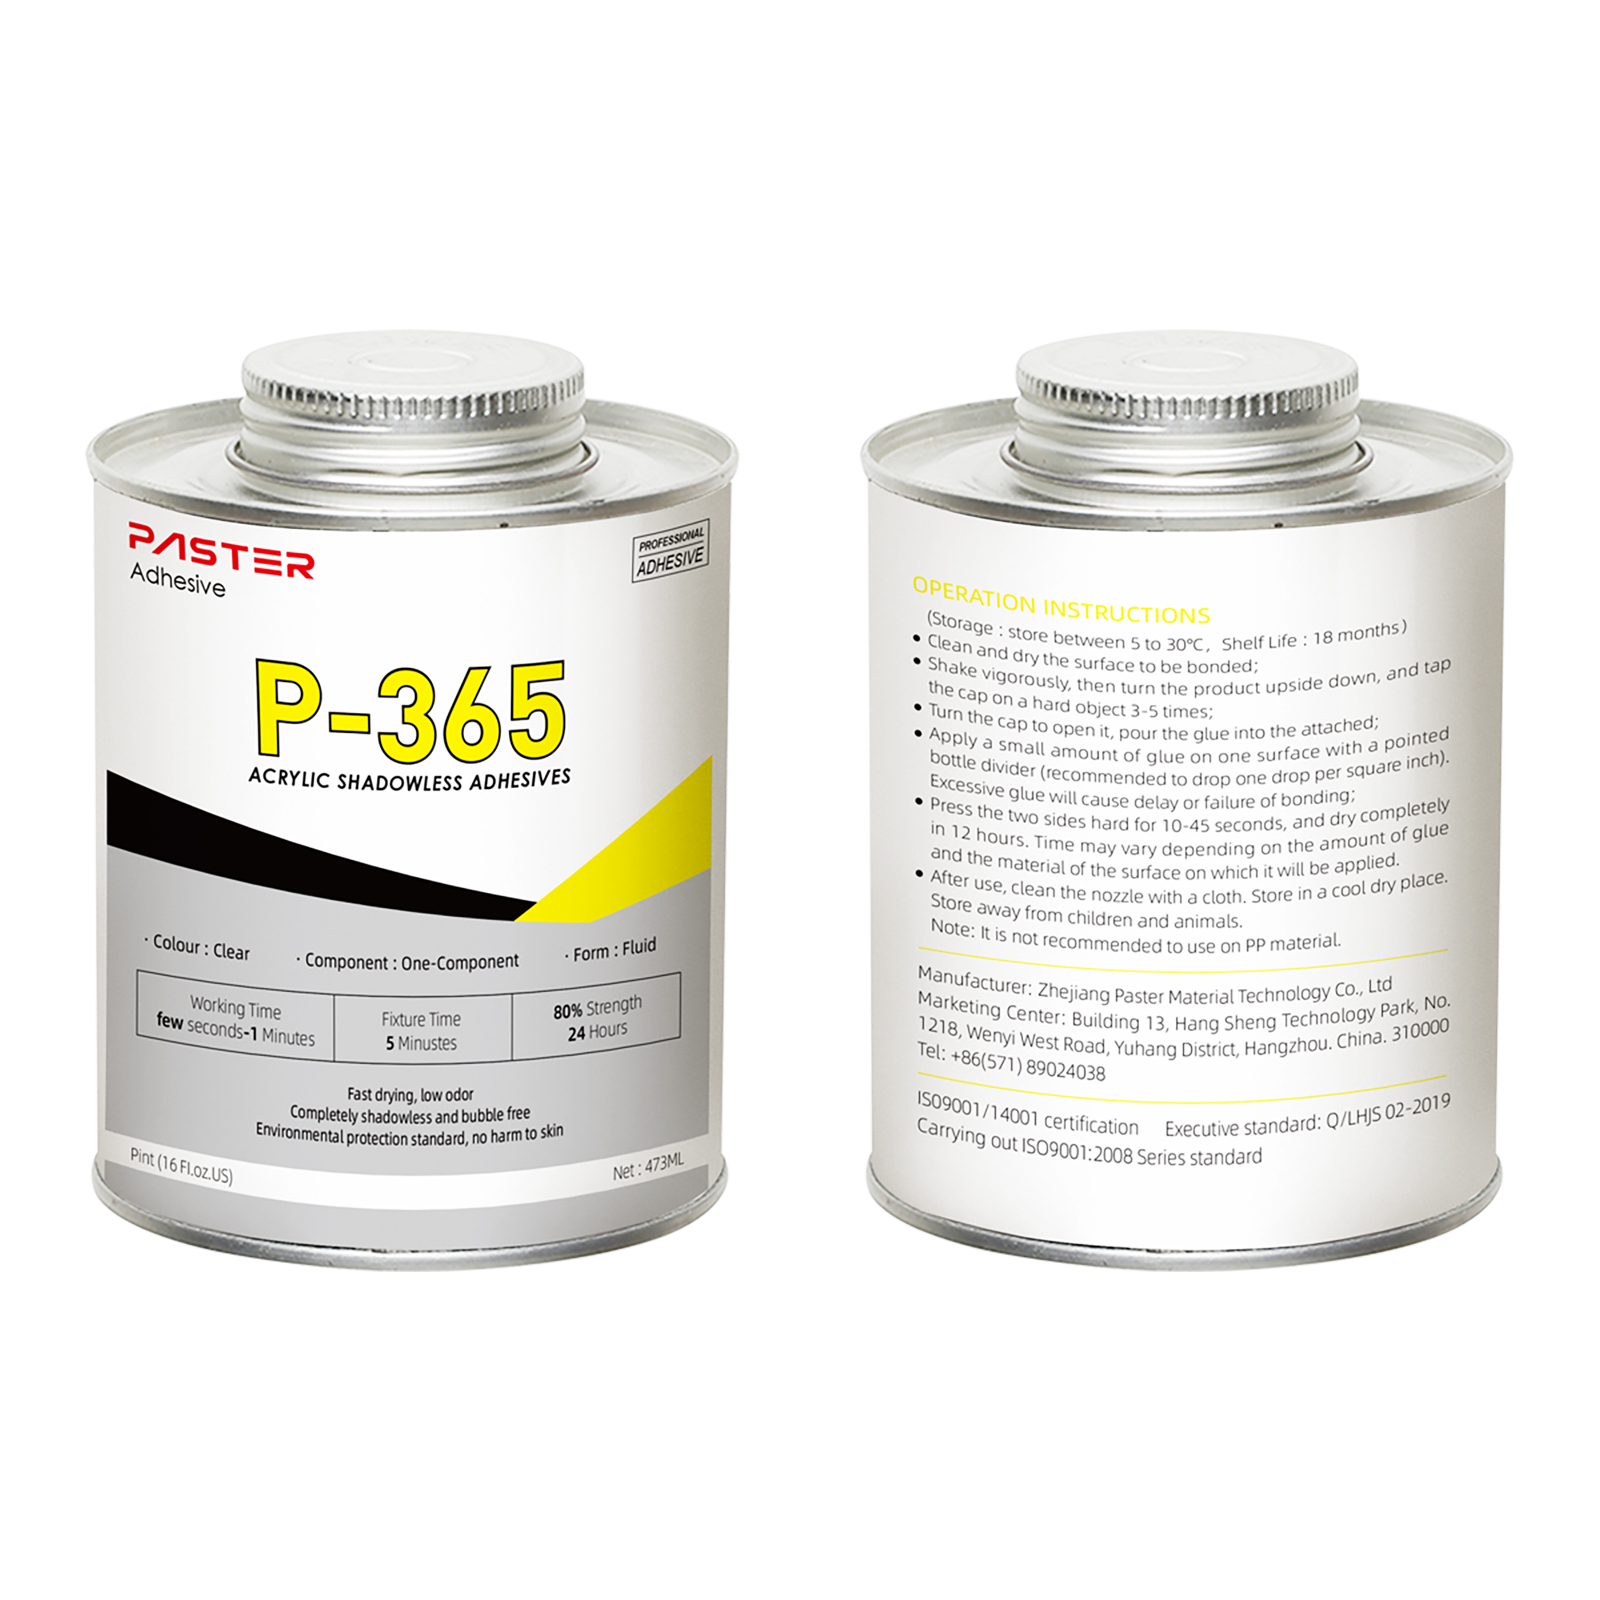 P-365 Acrylic Shadowless Adhesive for Channel Letter